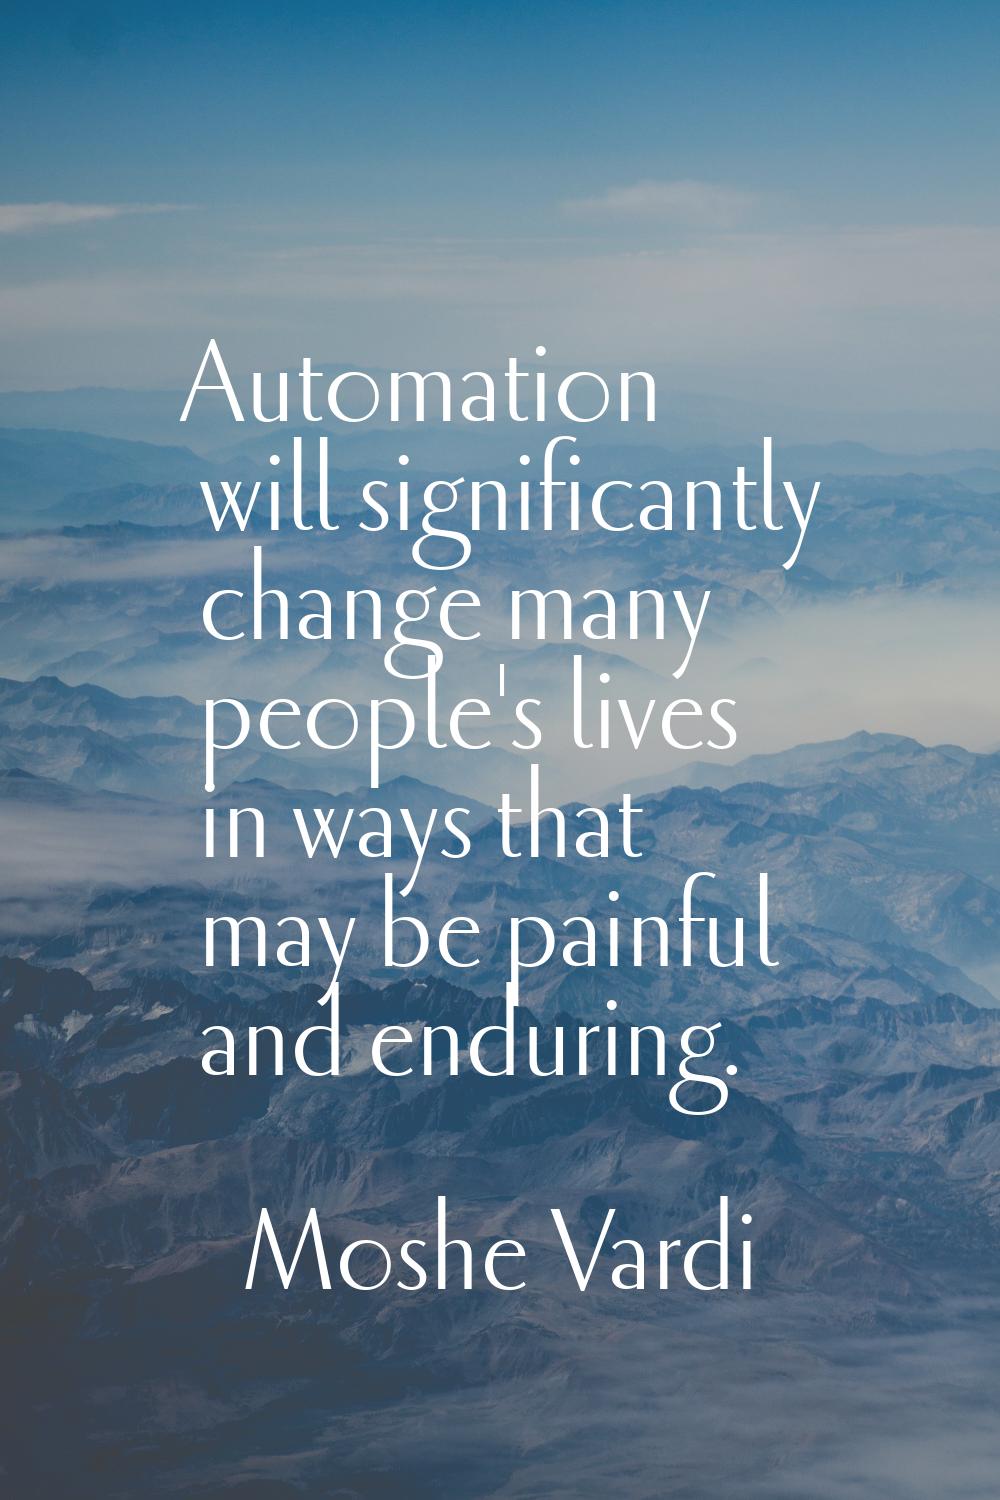 Automation will significantly change many people's lives in ways that may be painful and enduring.